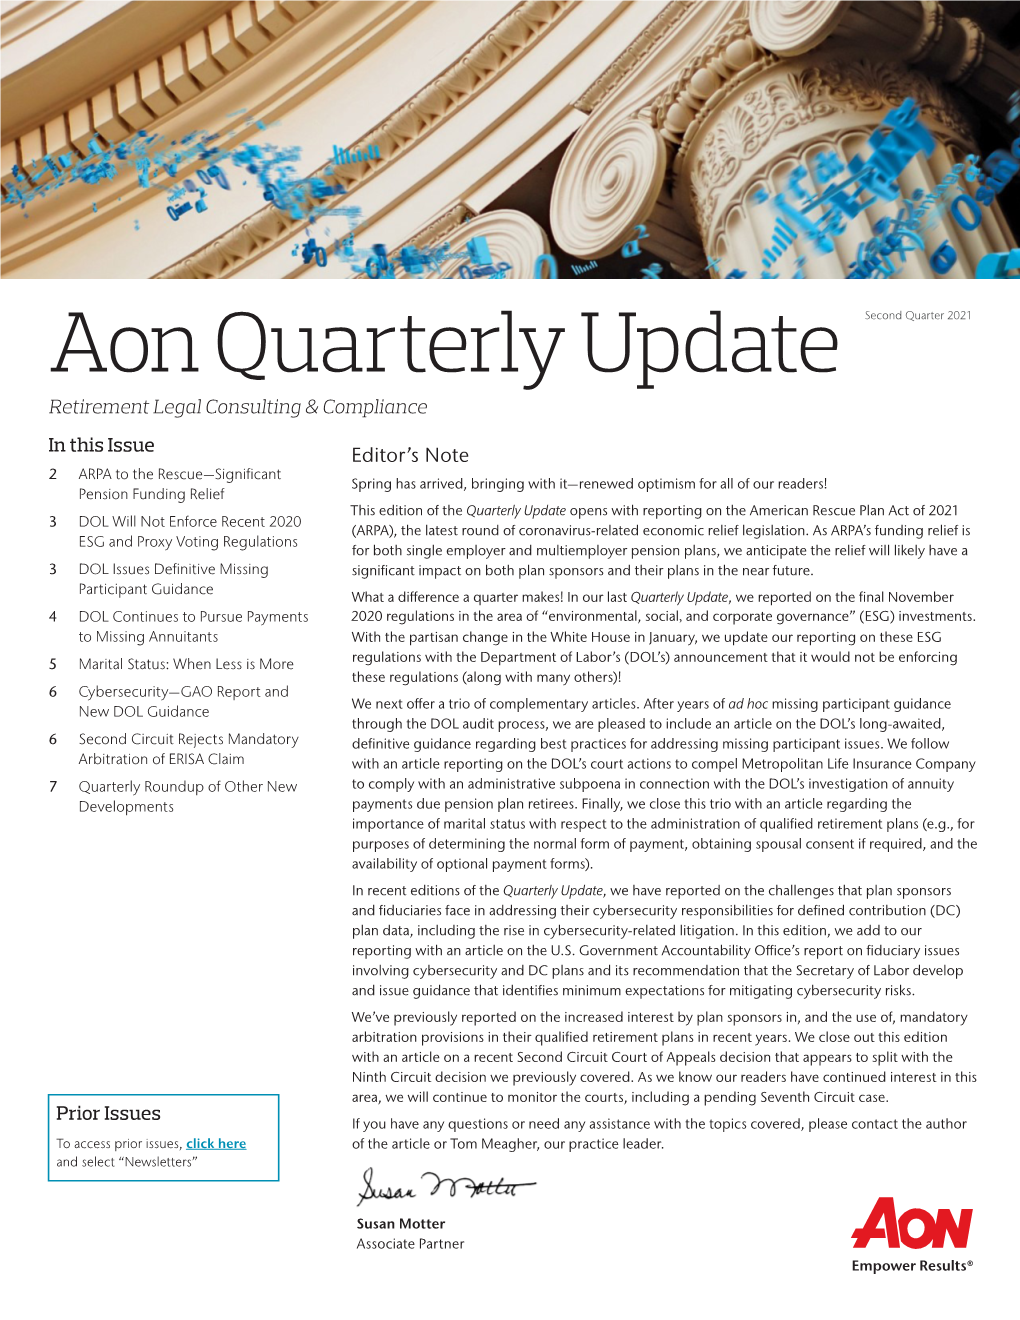 Aon Quarterly Update Second Quarter 2021 Retirement Legal Consulting & Compliance